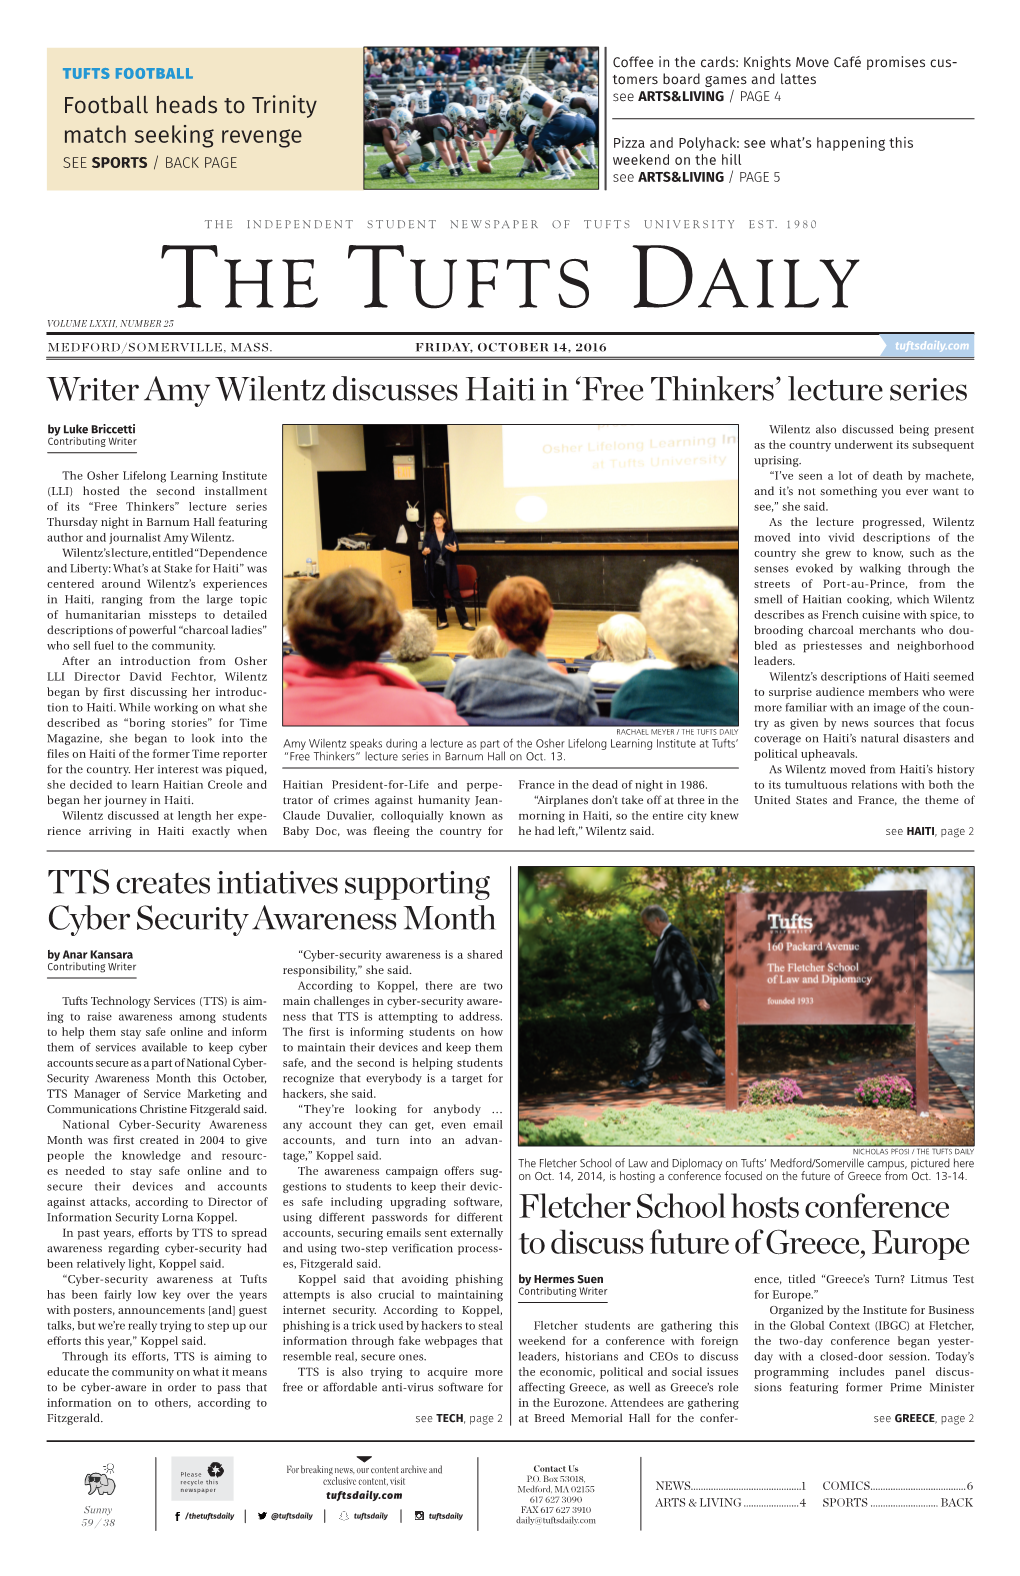 The Tufts Daily Volume Lxxii, Number 25